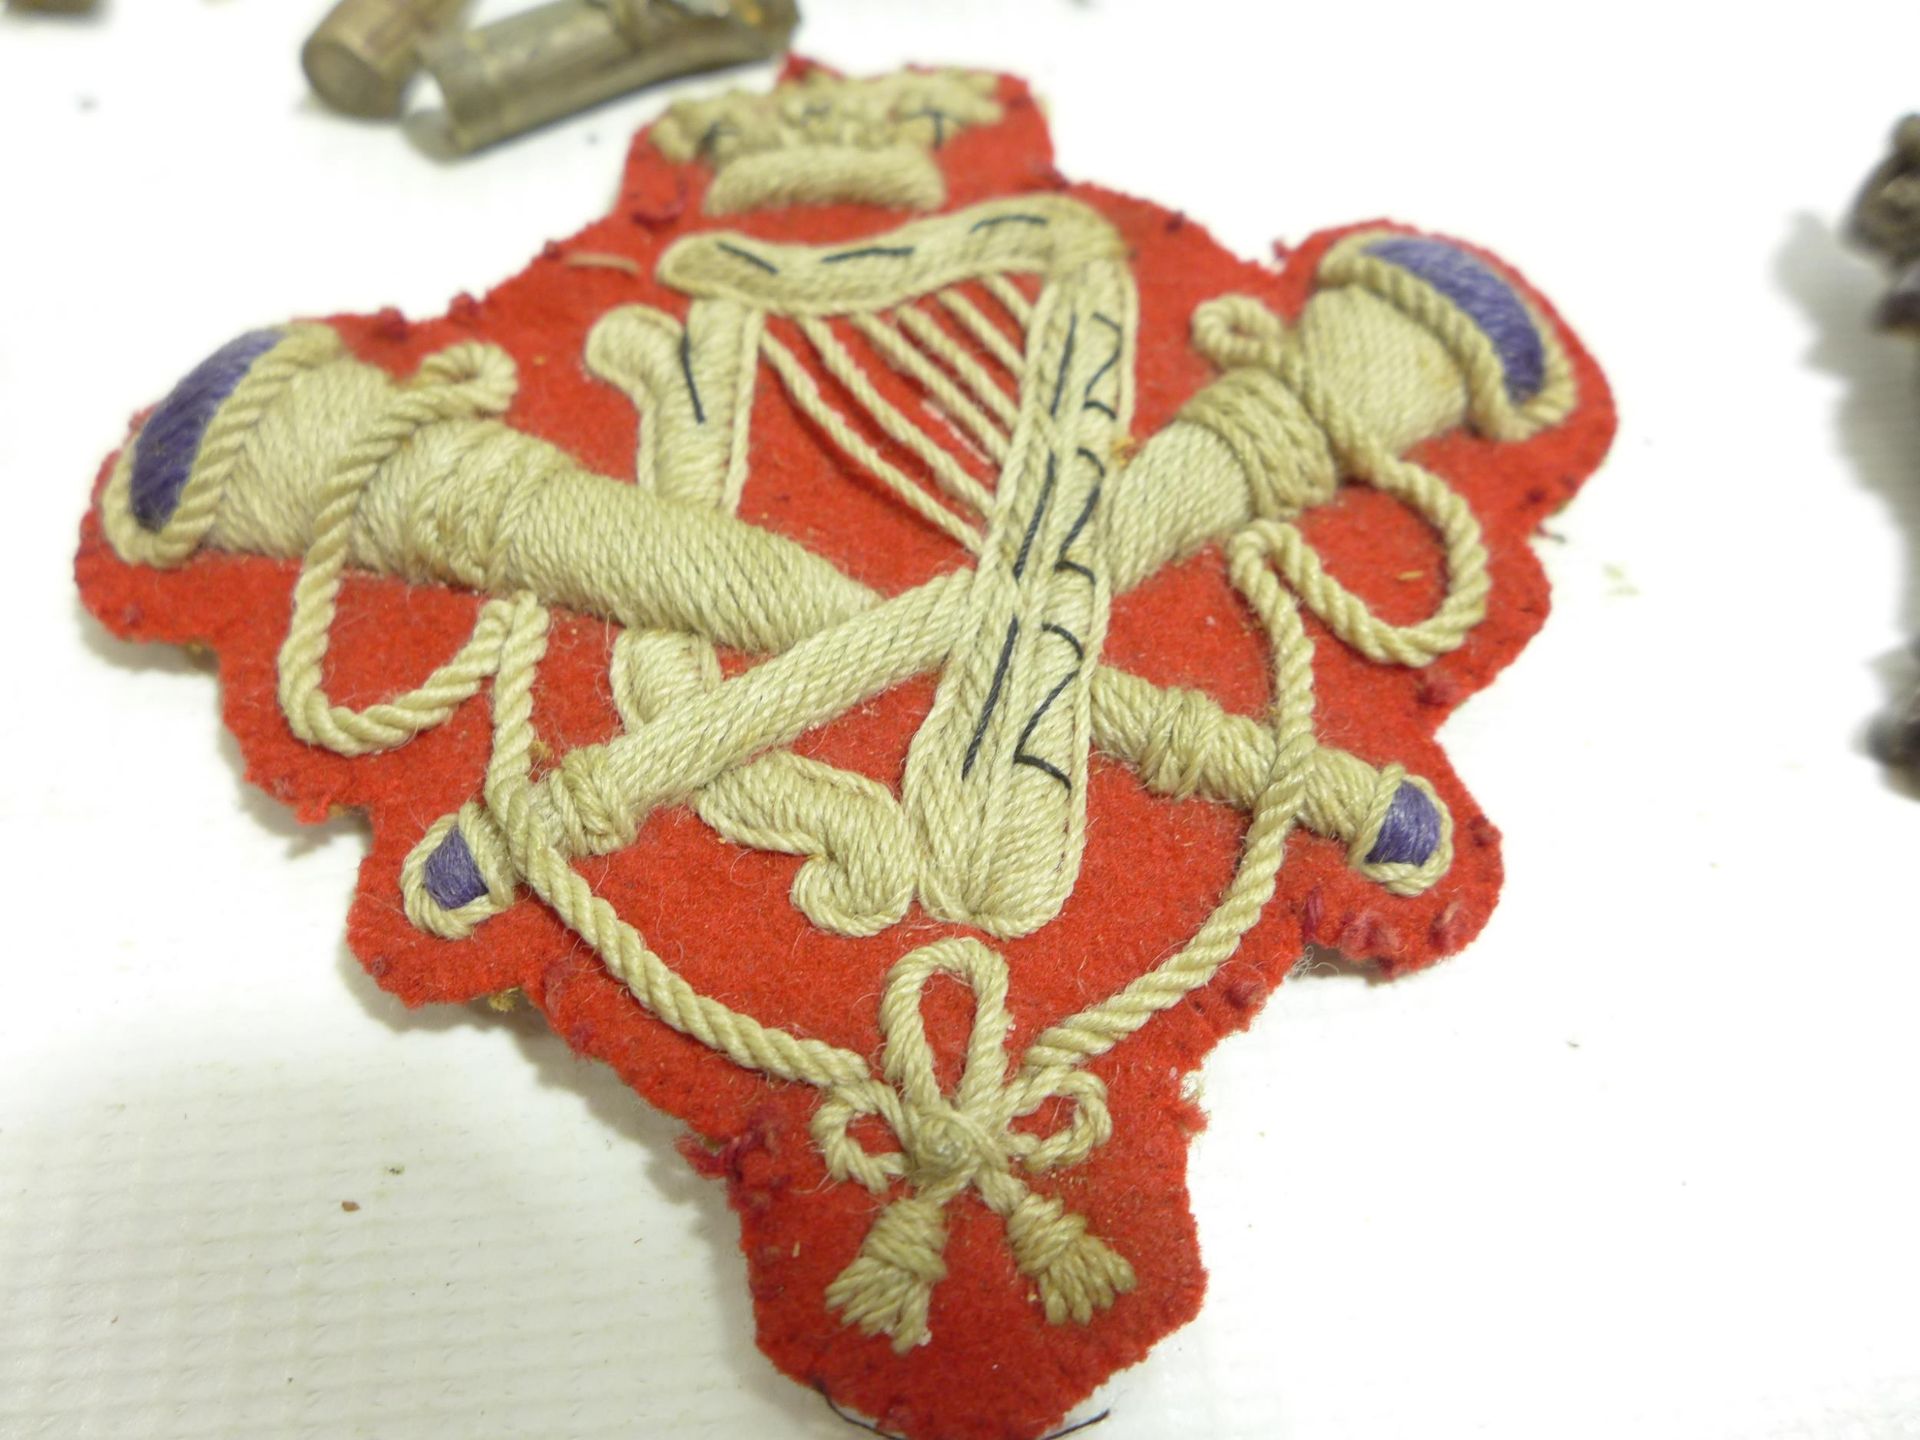 A BOER WAR PERIOD BOX CONTAINING NUMEROUS WORLD WAR I AND WORLD WAR II BADGES TO INCLUDE POLISH ARMY - Image 5 of 8